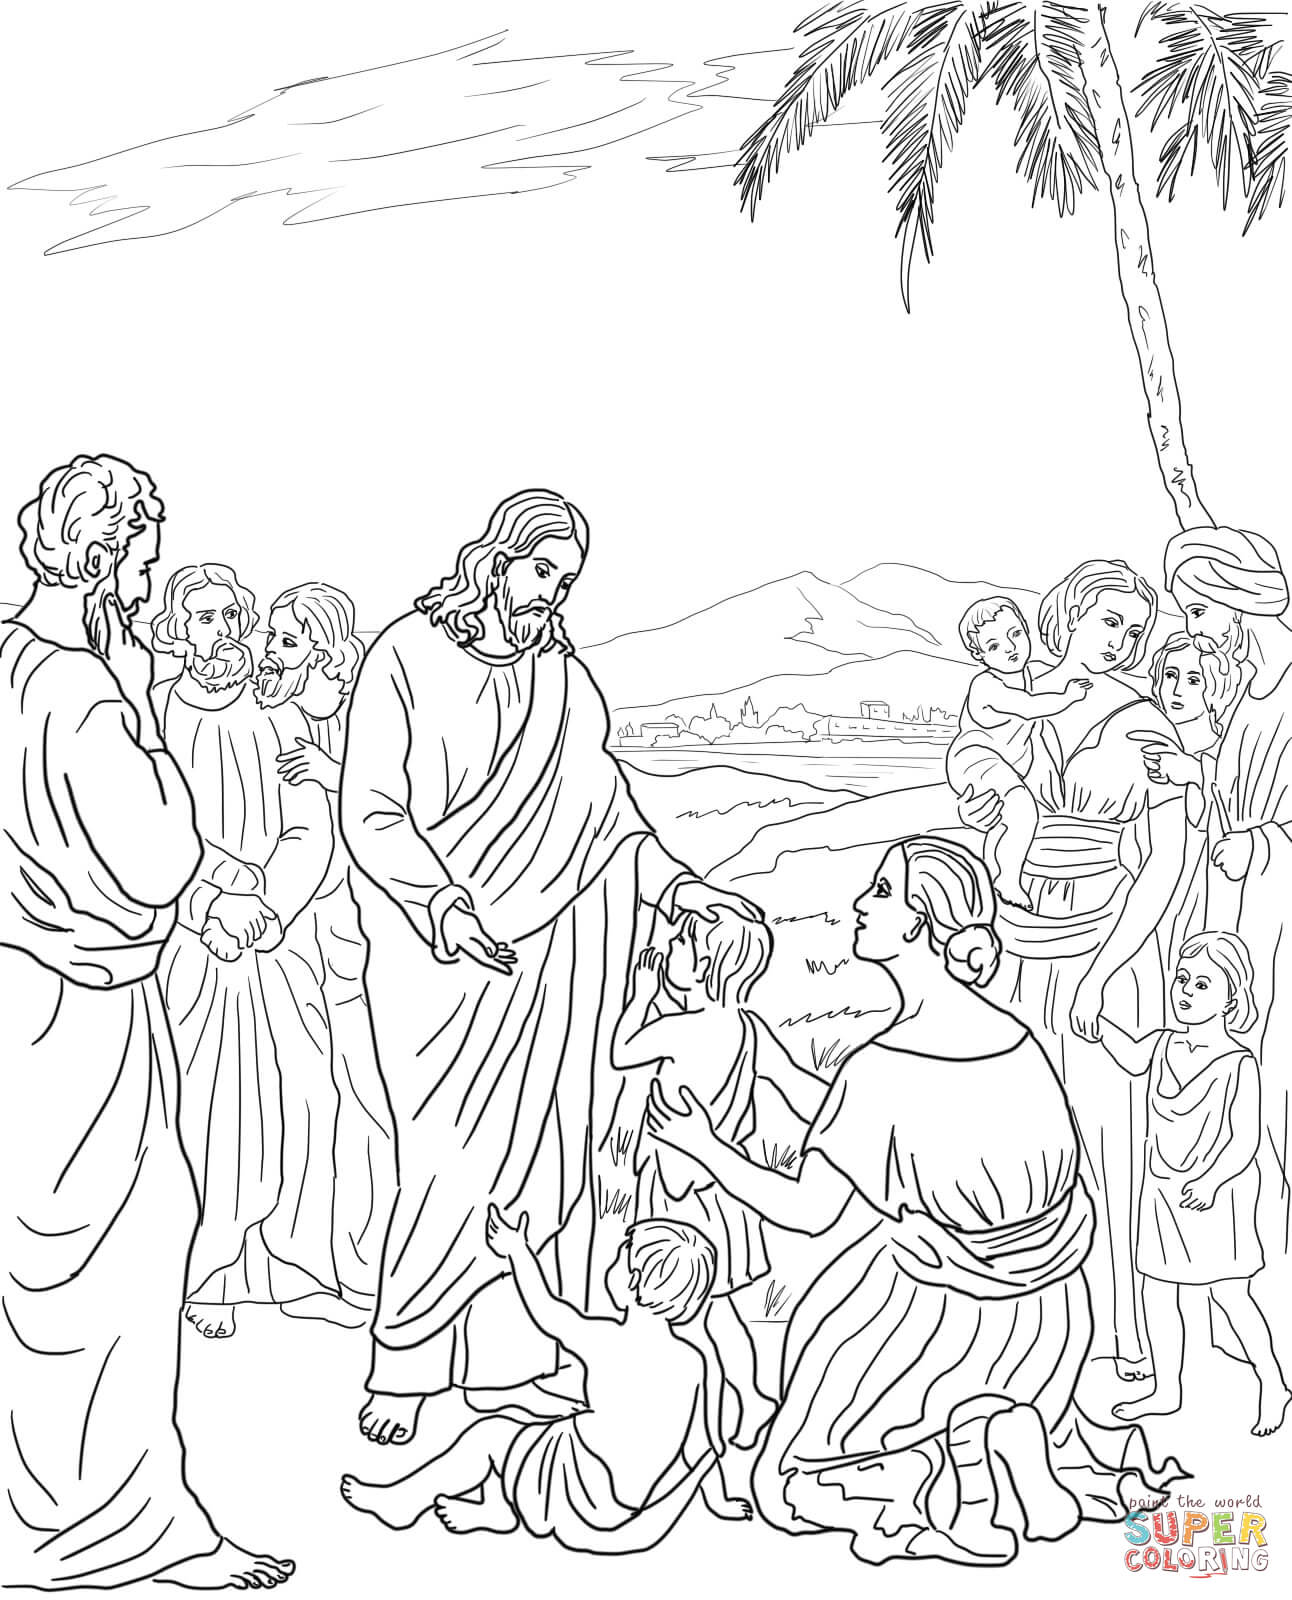 Jesus With Little Children Coloring Page - Coloring Home